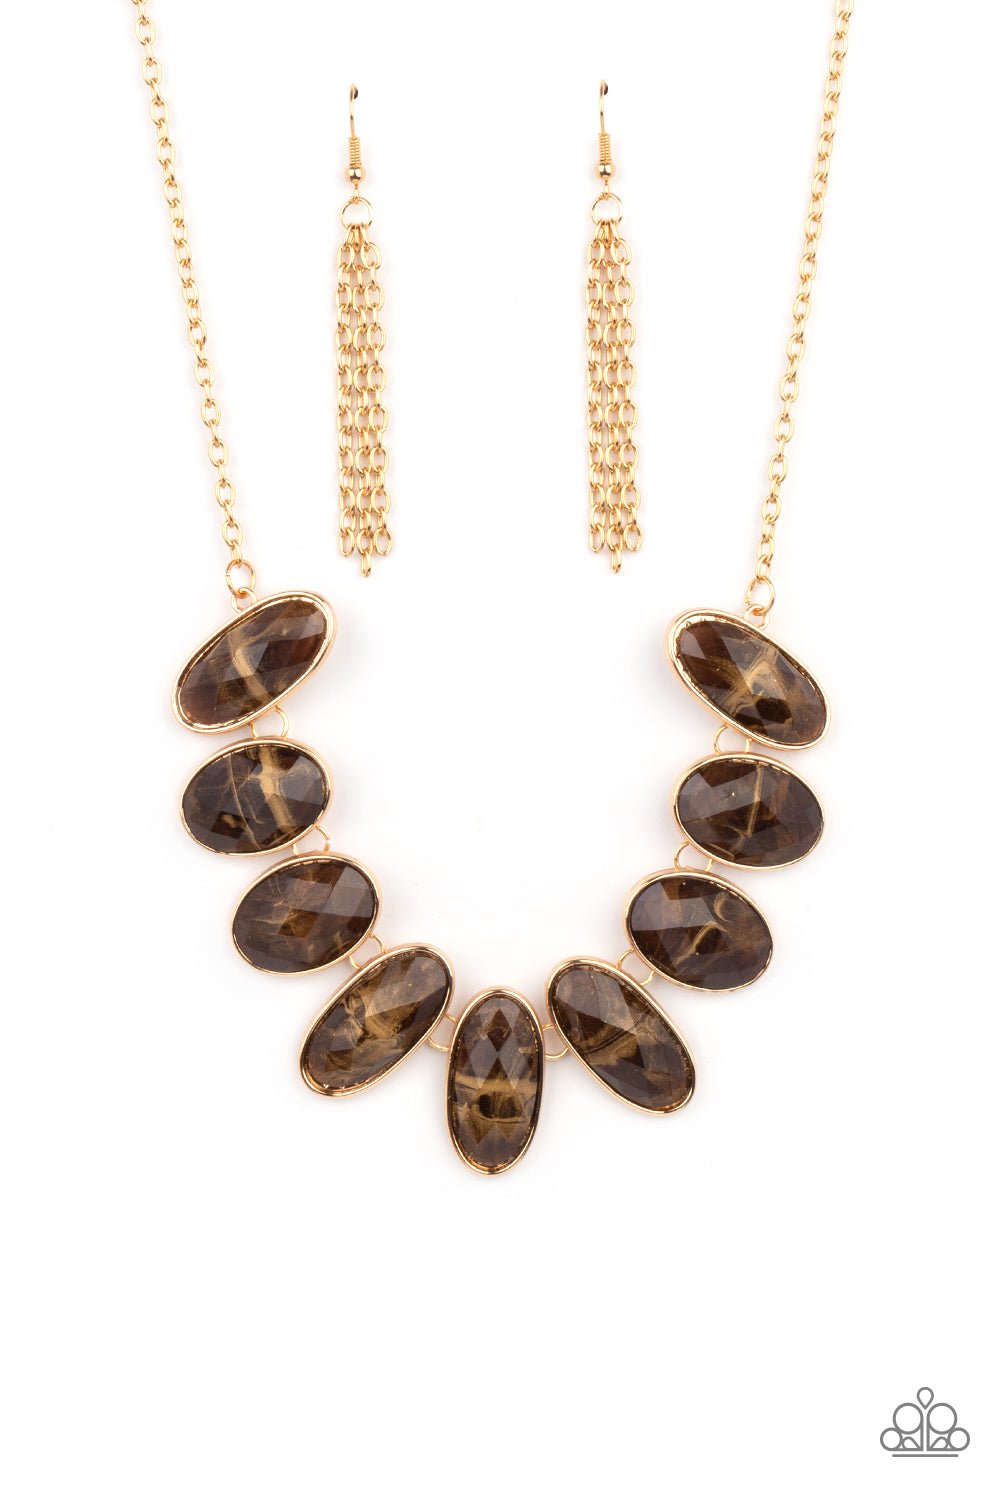 Elliptical Episode - Brown Glossy Gems Necklaces generous glossy brown gems, dusted in shimmery gold, lay in oval gold frames and link across the collar creating a glimmering statement. Features an adjustable clasp closure.  Sold as one individual necklace. Includes one pair of matching earrings.  Paparazzi Jewelry is lead and nickel free so it's perfect for sensitive skin too!